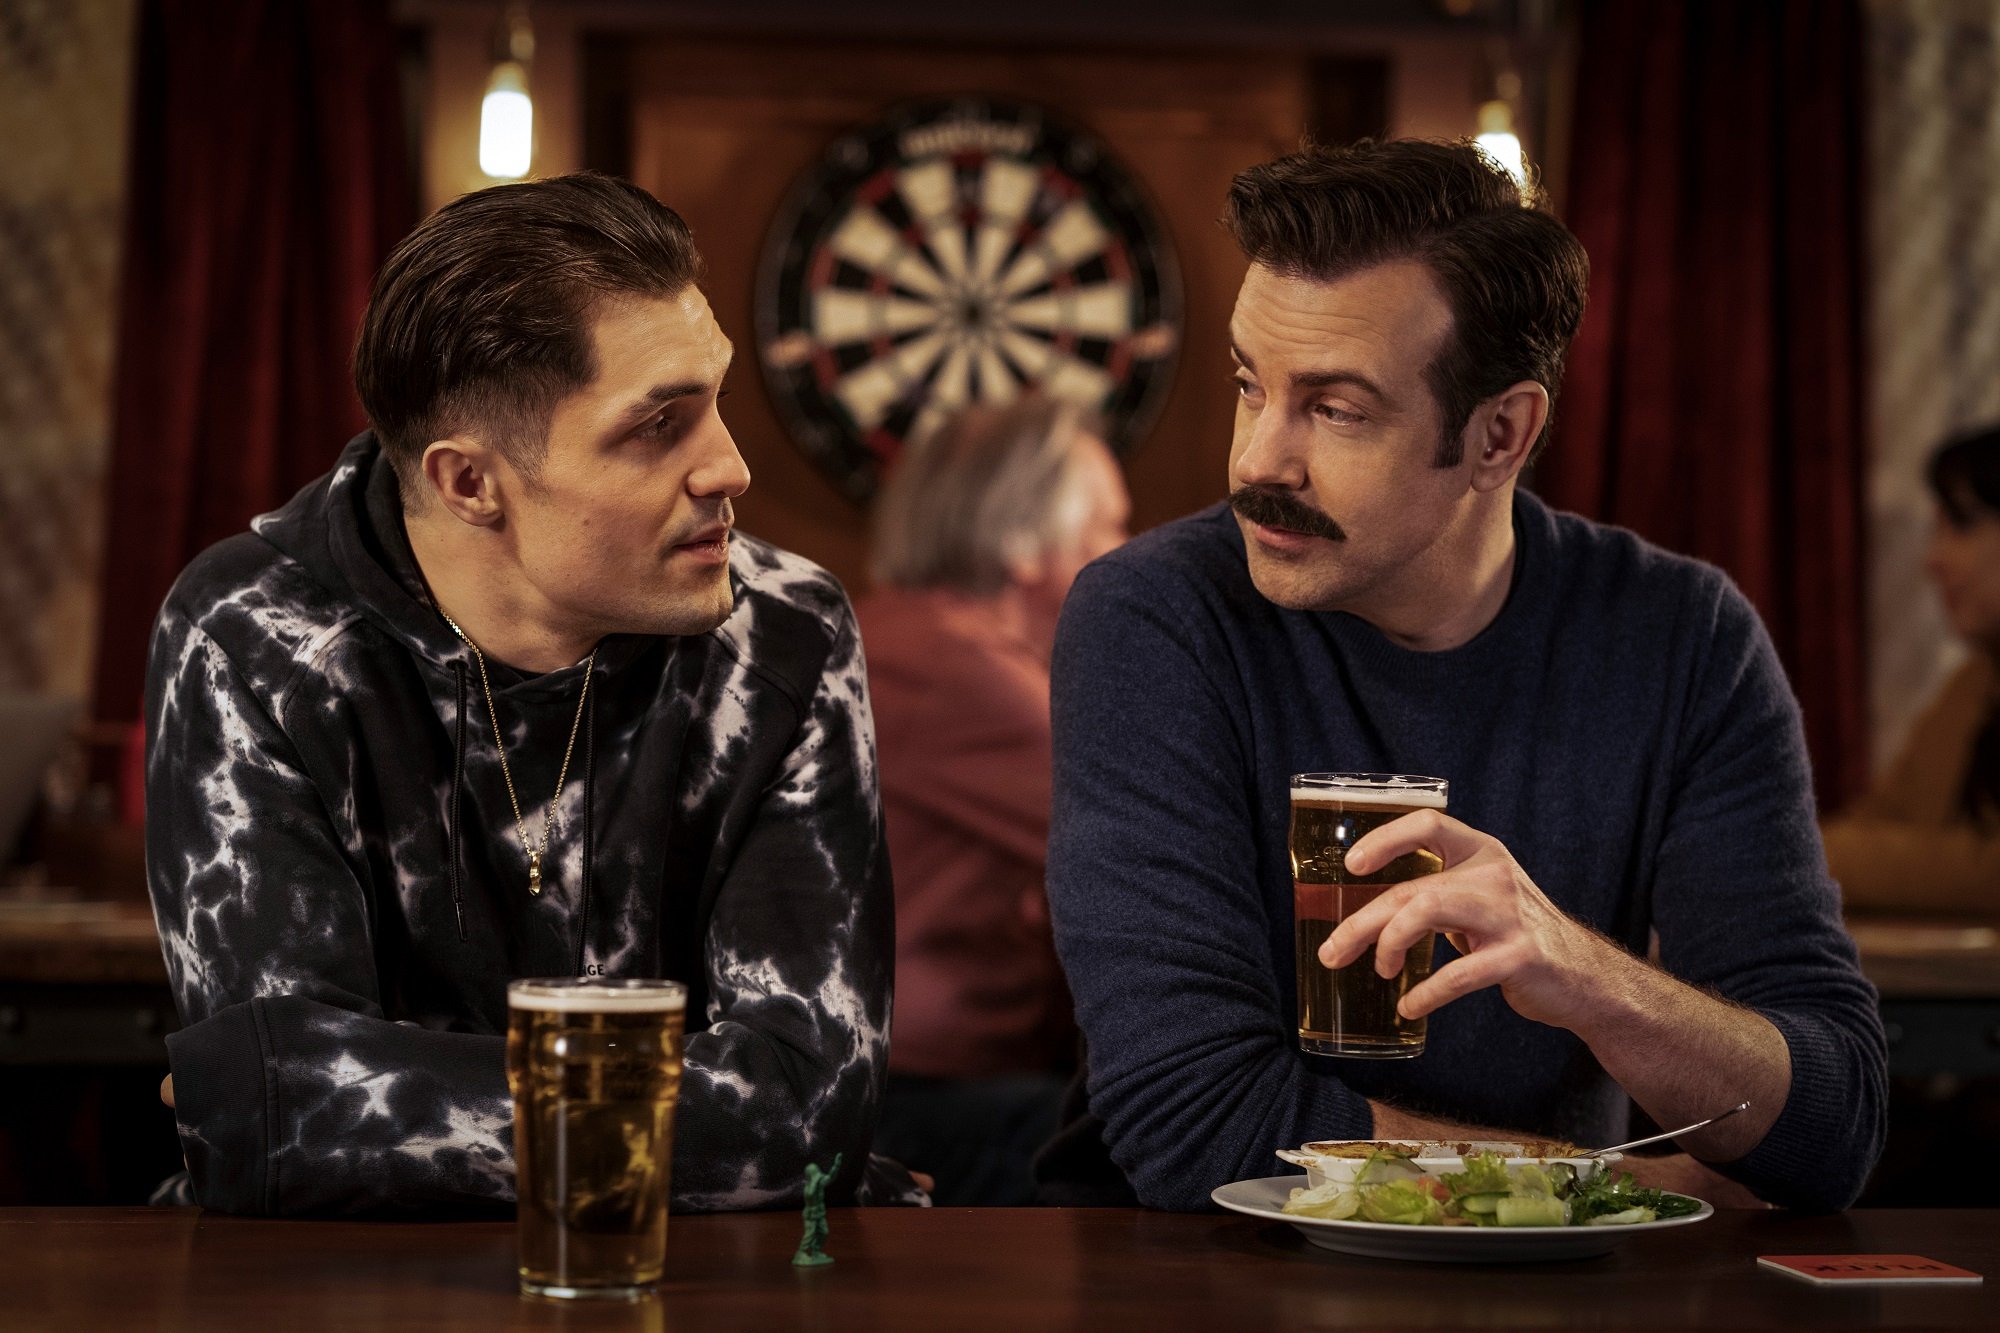 Jamie Tartt and Ted Lasso meet at a restaurant and drink beer in 'Ted Lasso'